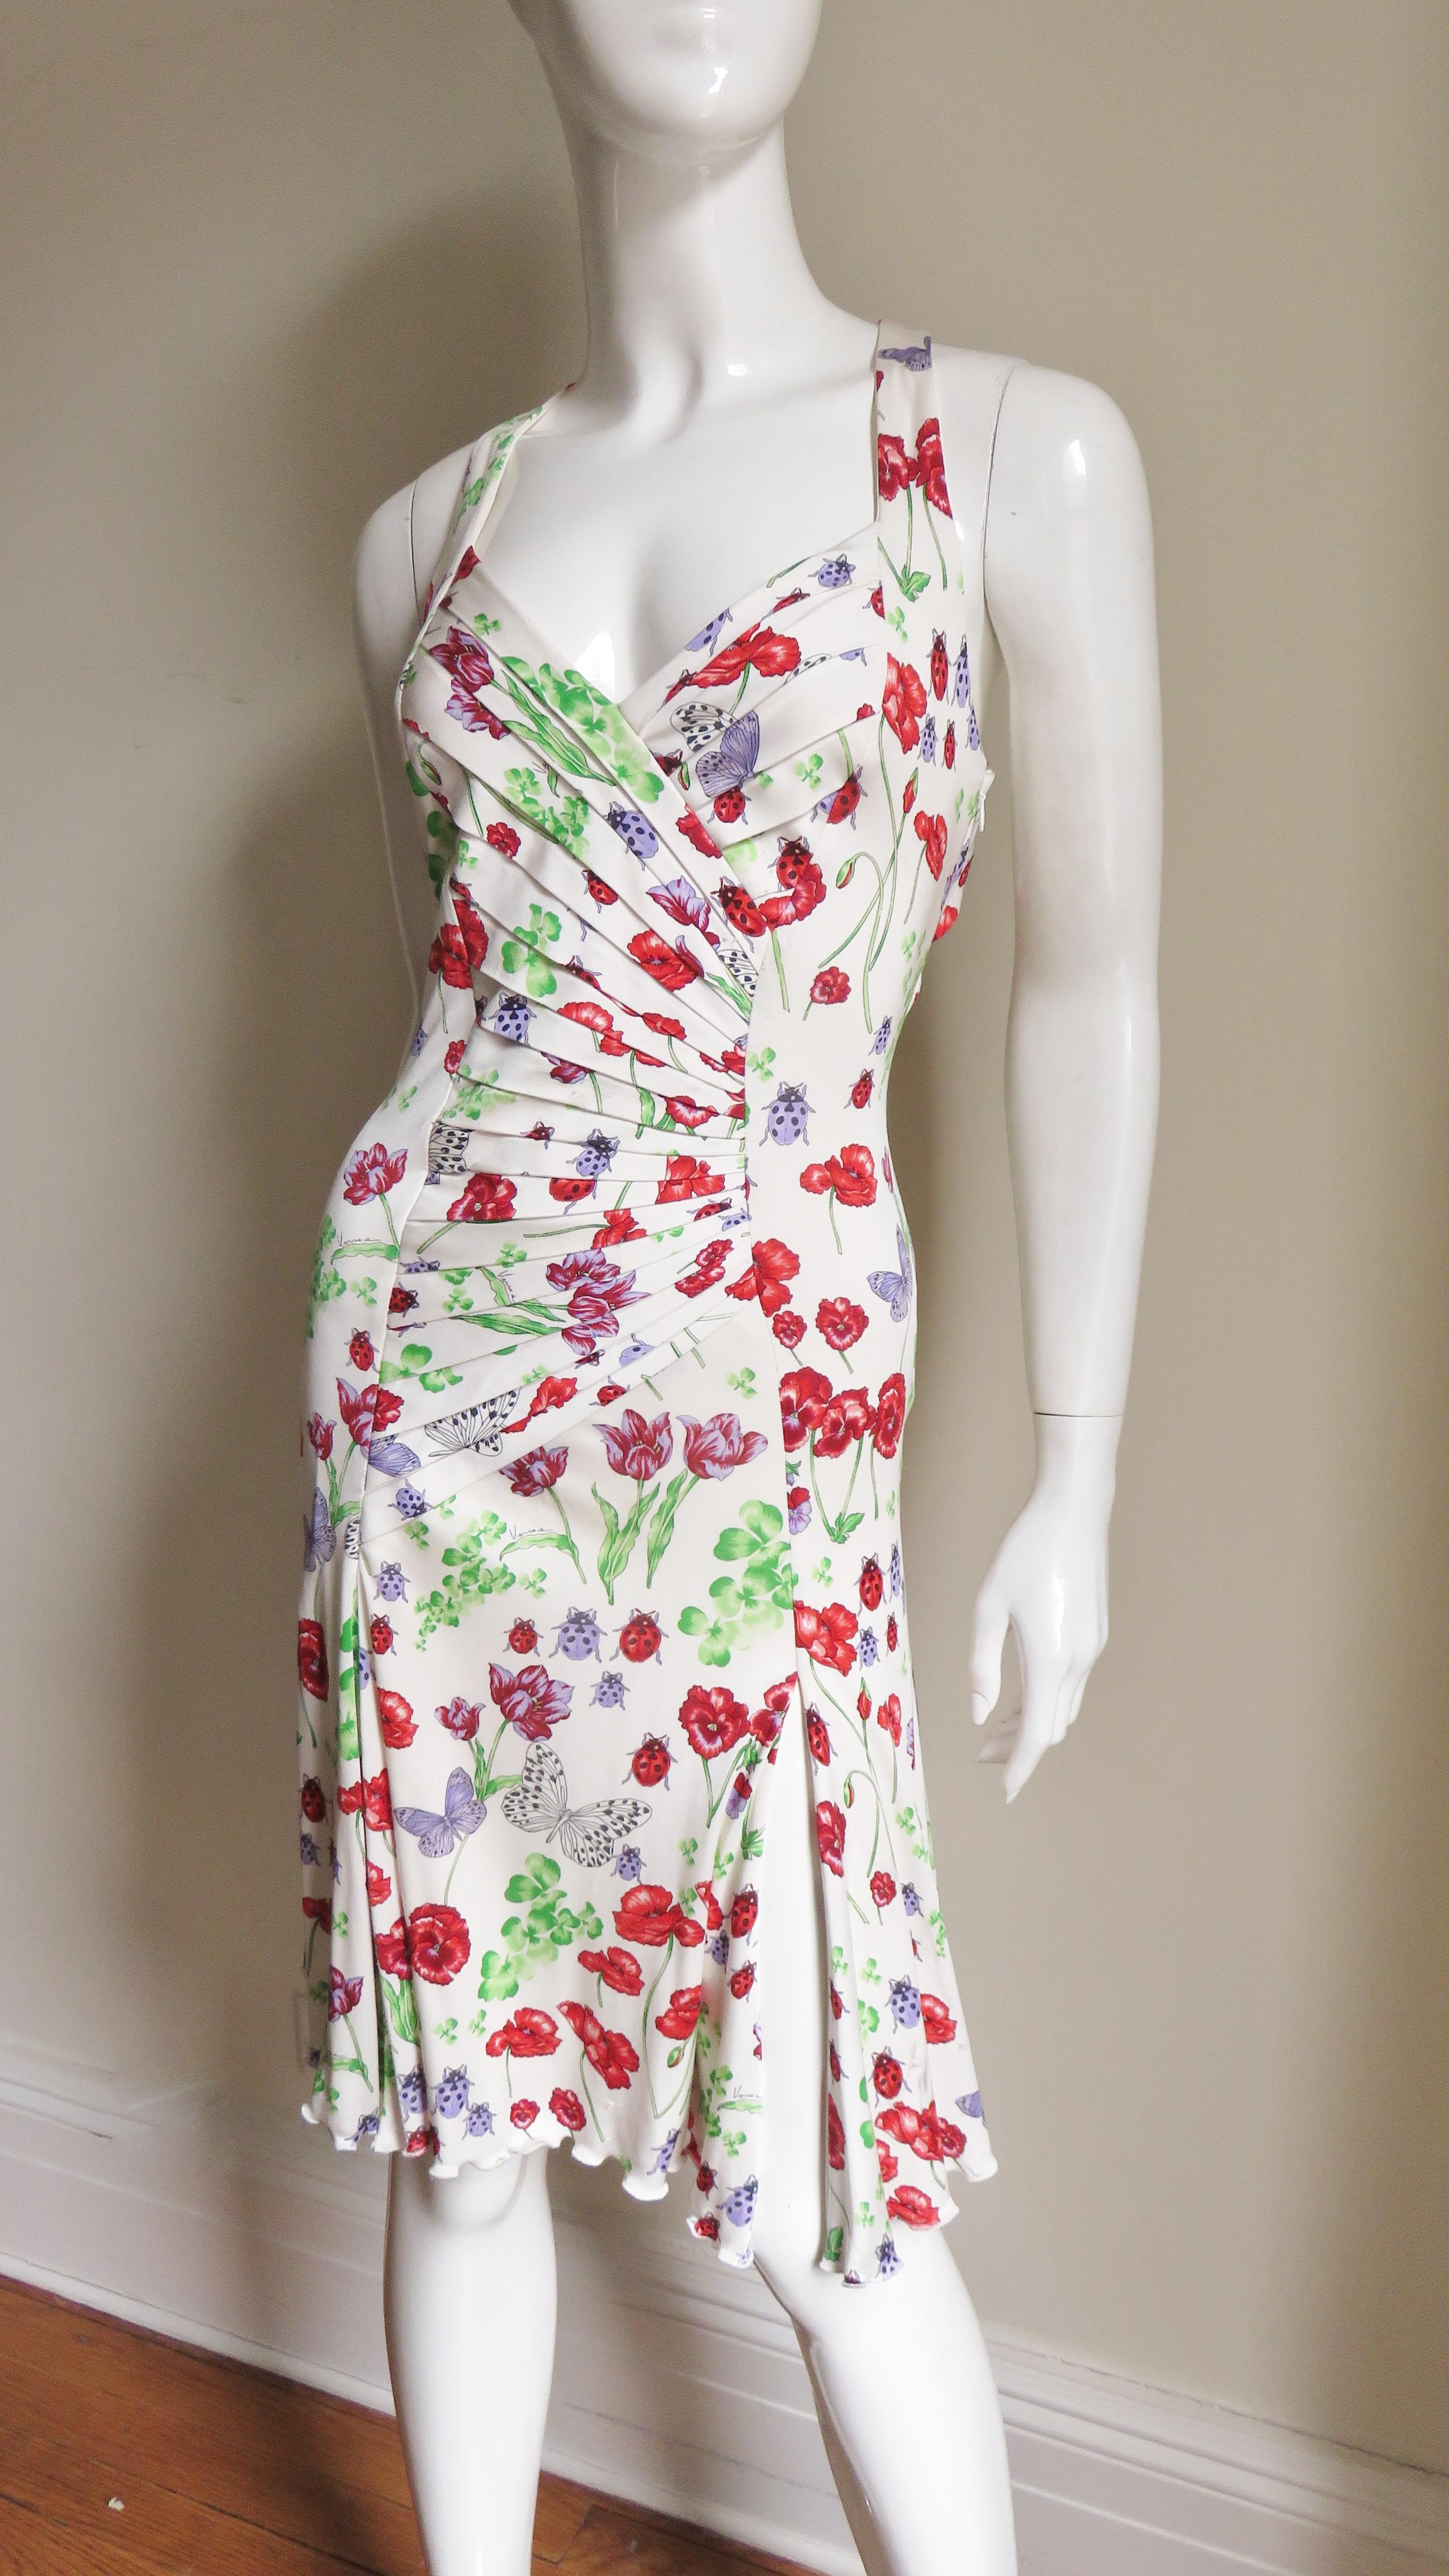 A beautiful fine white silk jersey dress from Versace with a flowers and butterflies pattern in red, purple and green. It has a plunging neckline, a crossing front tucked bodice and shoulder straps crossing the upper portion of a largely nude back.